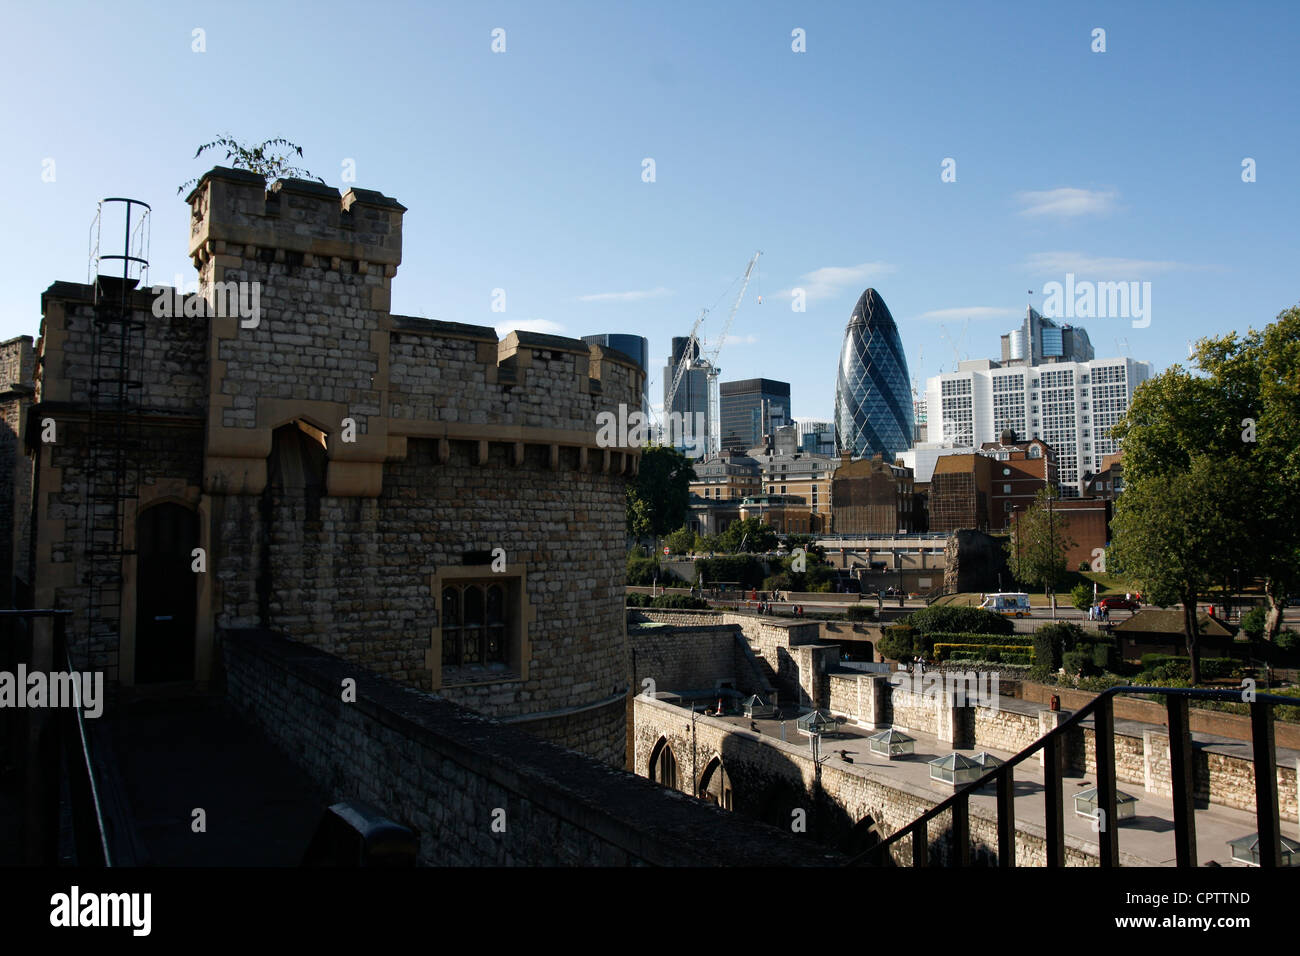 the Gherkin building, 30 St mary Axe, viewed from the Tower of London Stock Photo